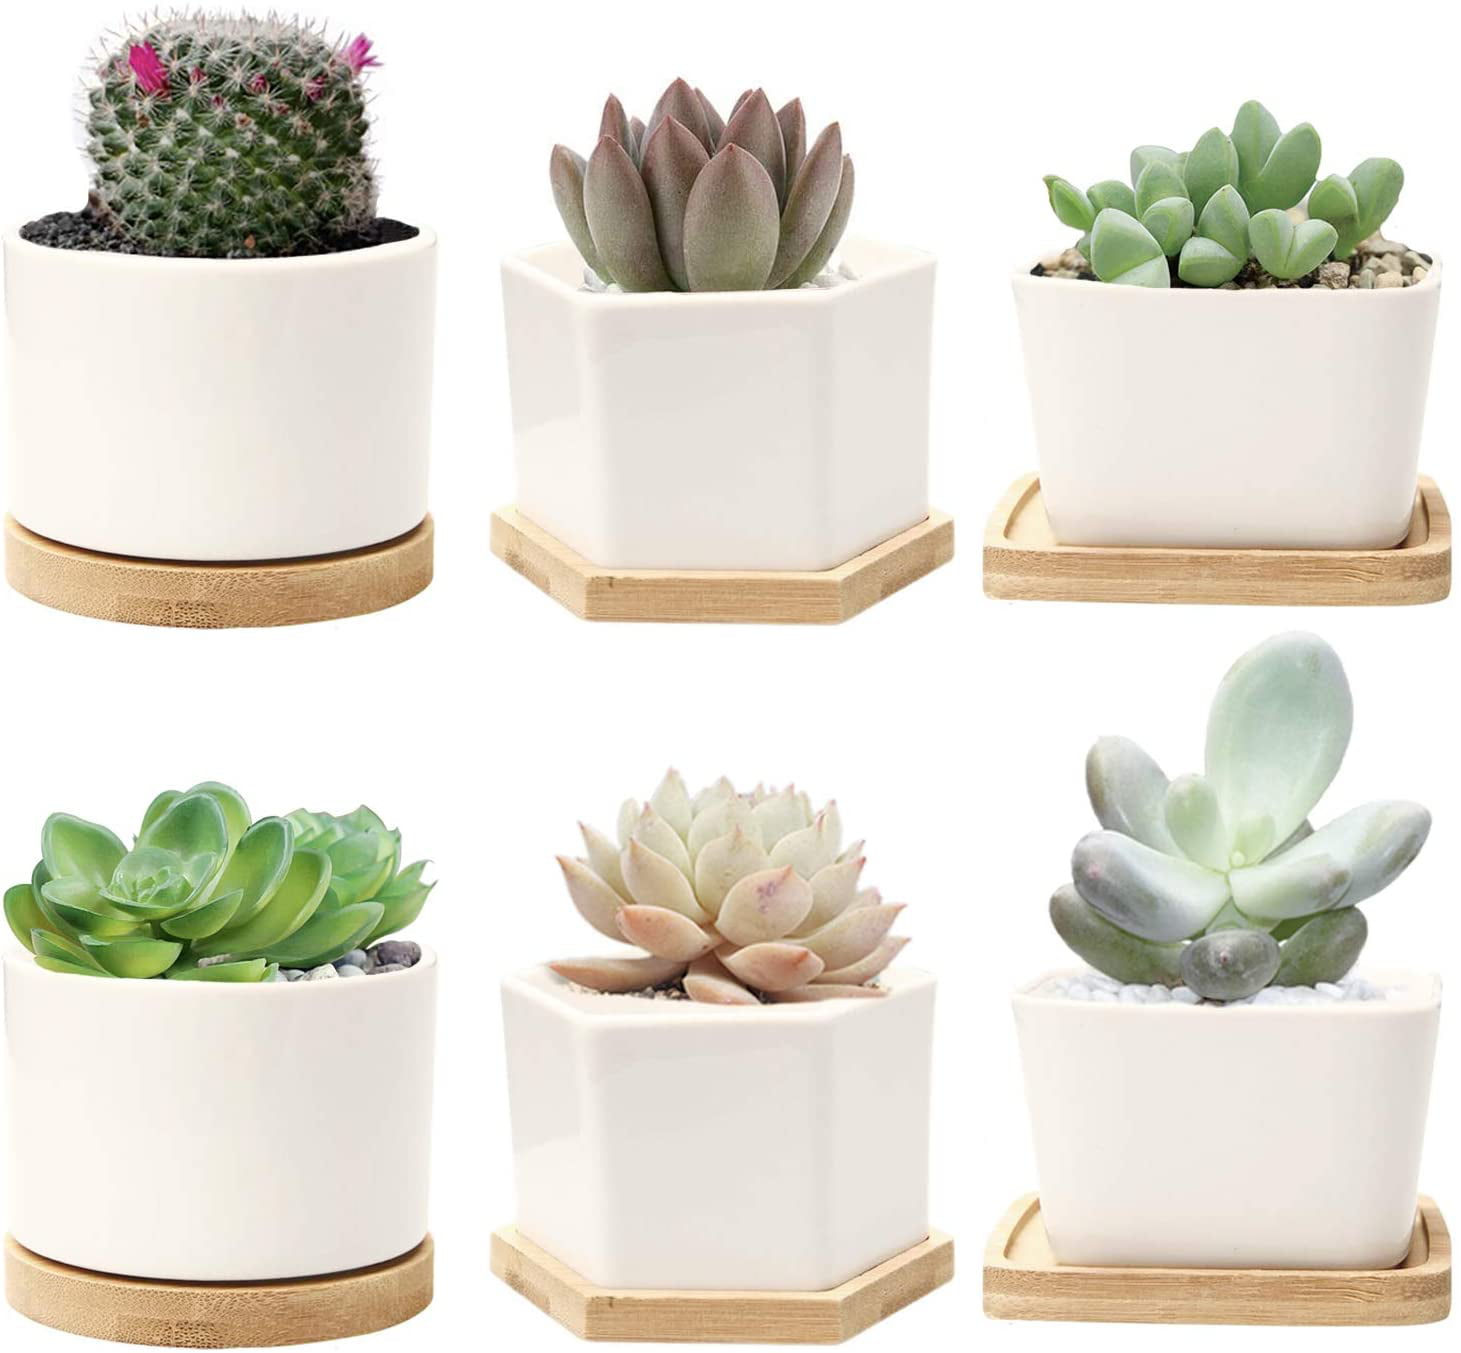 Plants NOT Included 【2021 New Upgraded】 Geometric Patterns Small Plant Pots Decor for Home and Office Succulent Pots 6 Pack,3 Inch Ceramic Planter with Drainage and Bamboo Tray